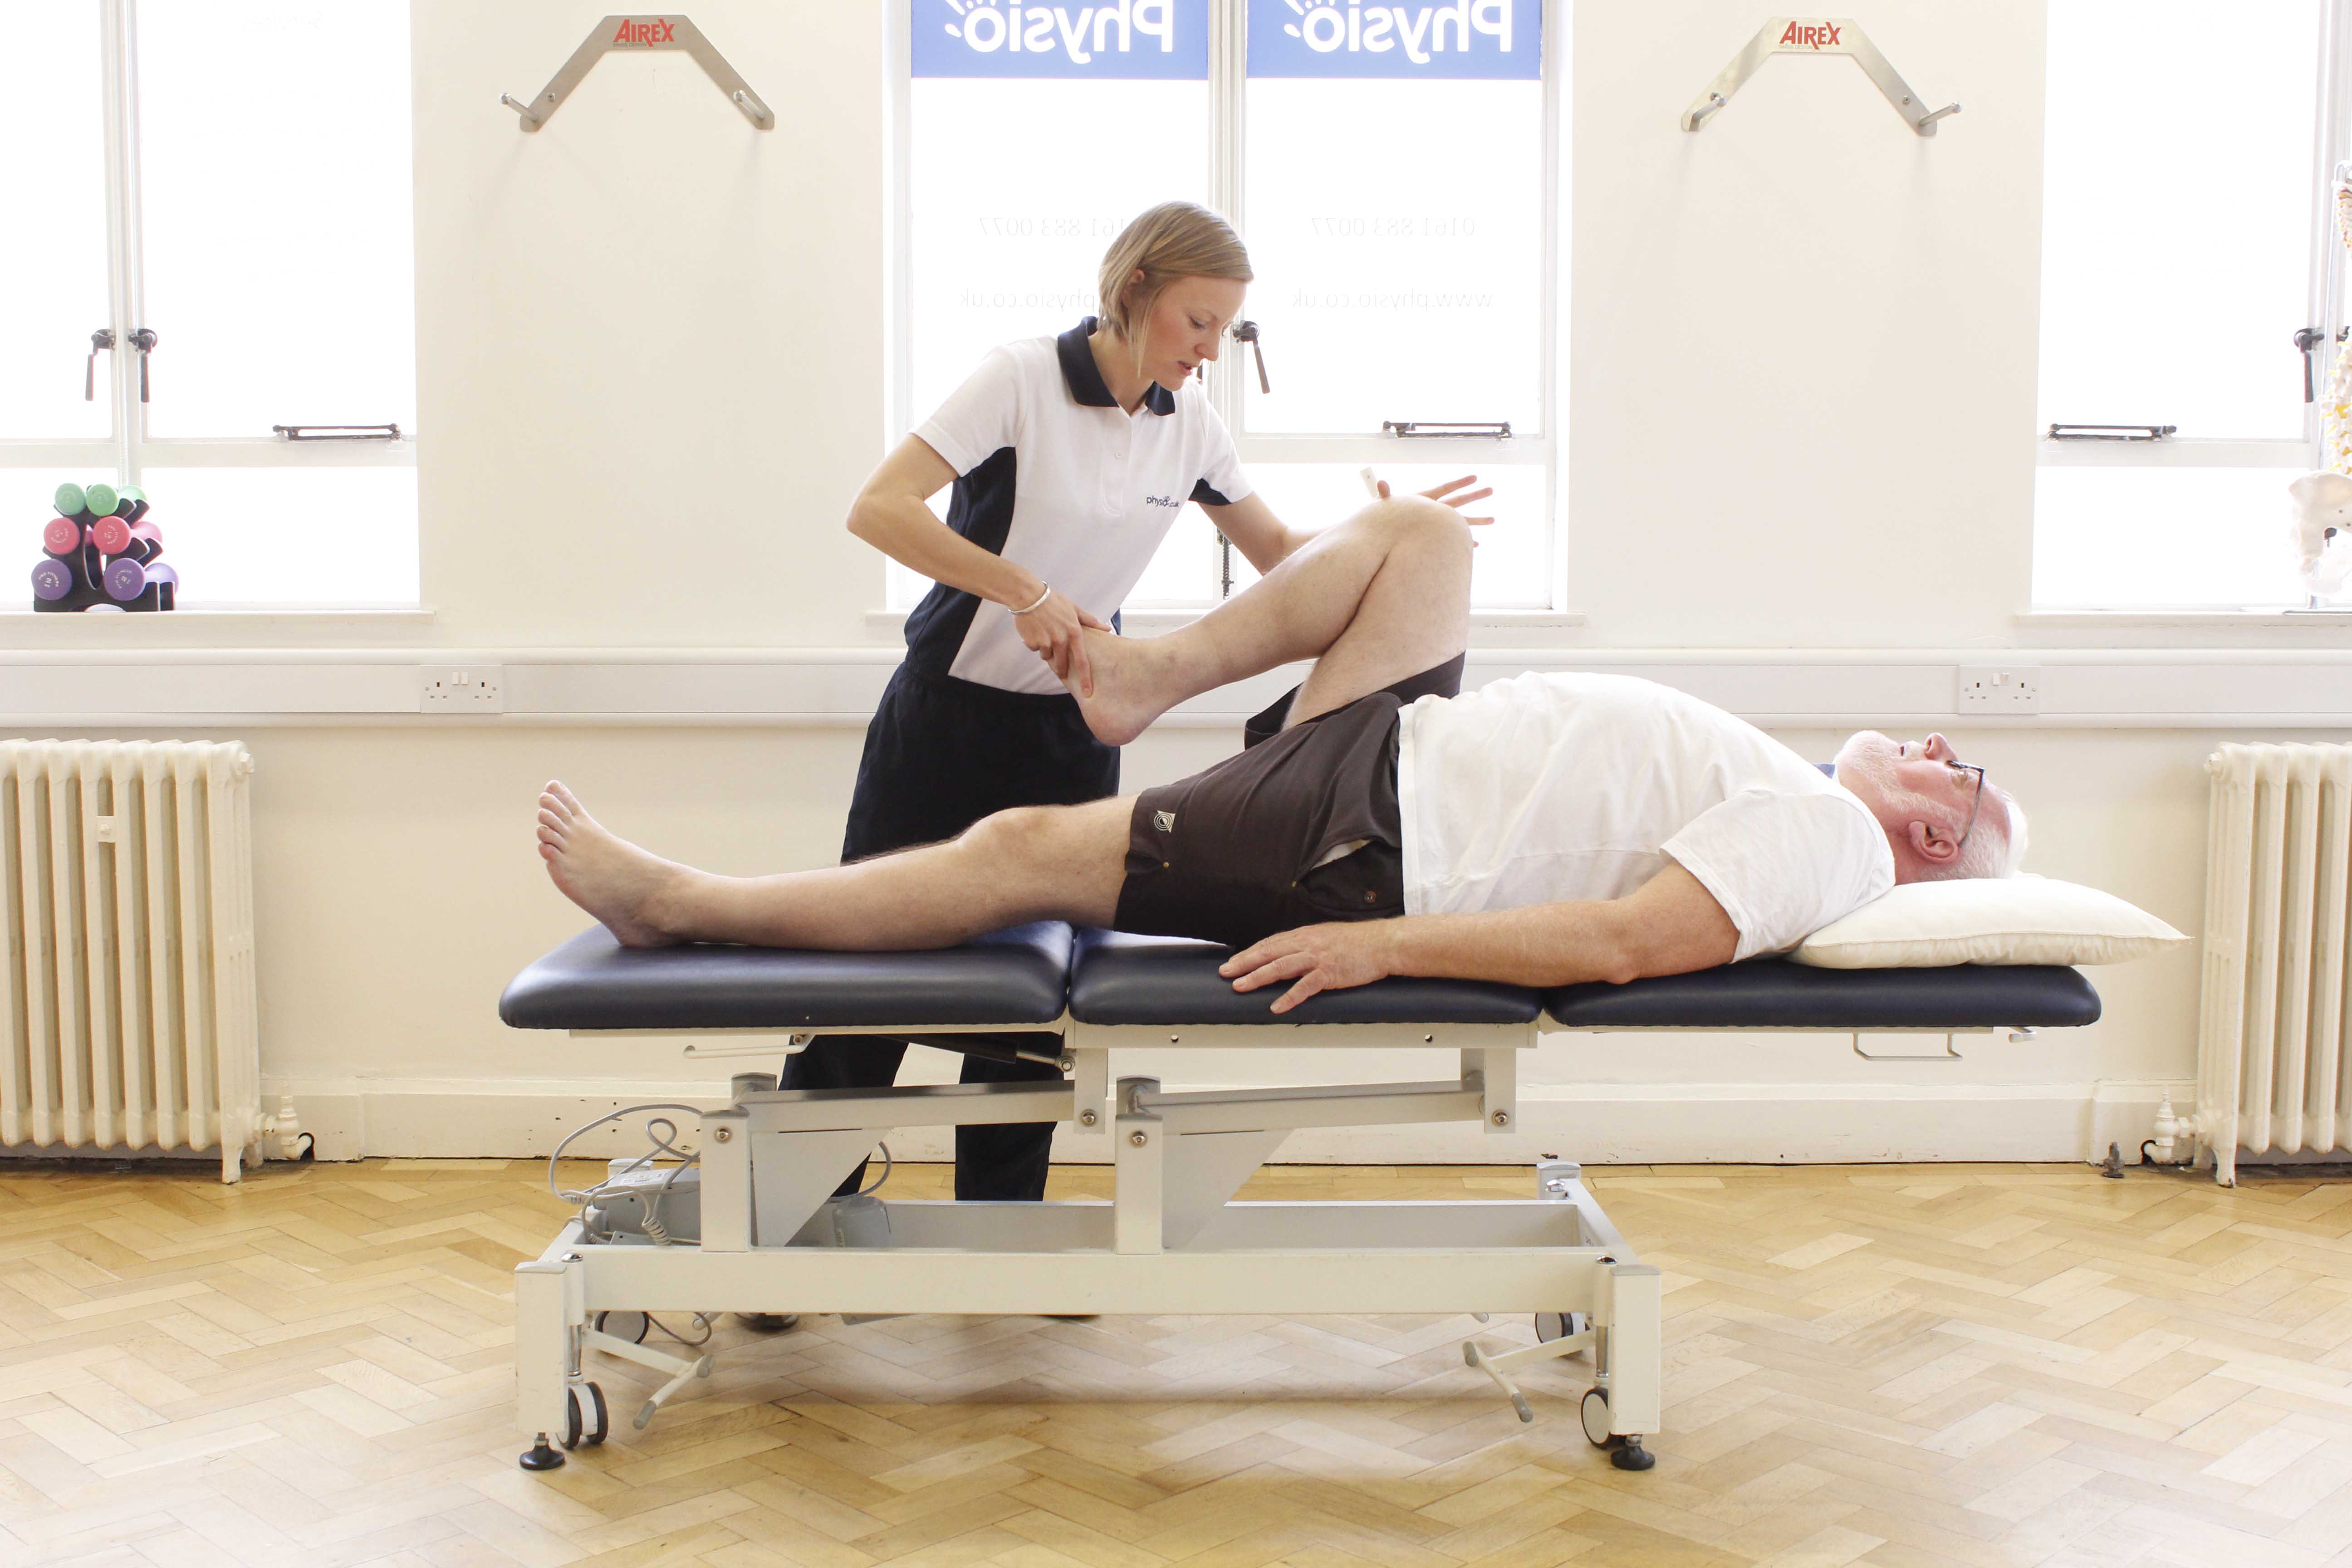 Stretches and mobilisation of the hip and knee joints by experienced musculoskeletal physiotherapist